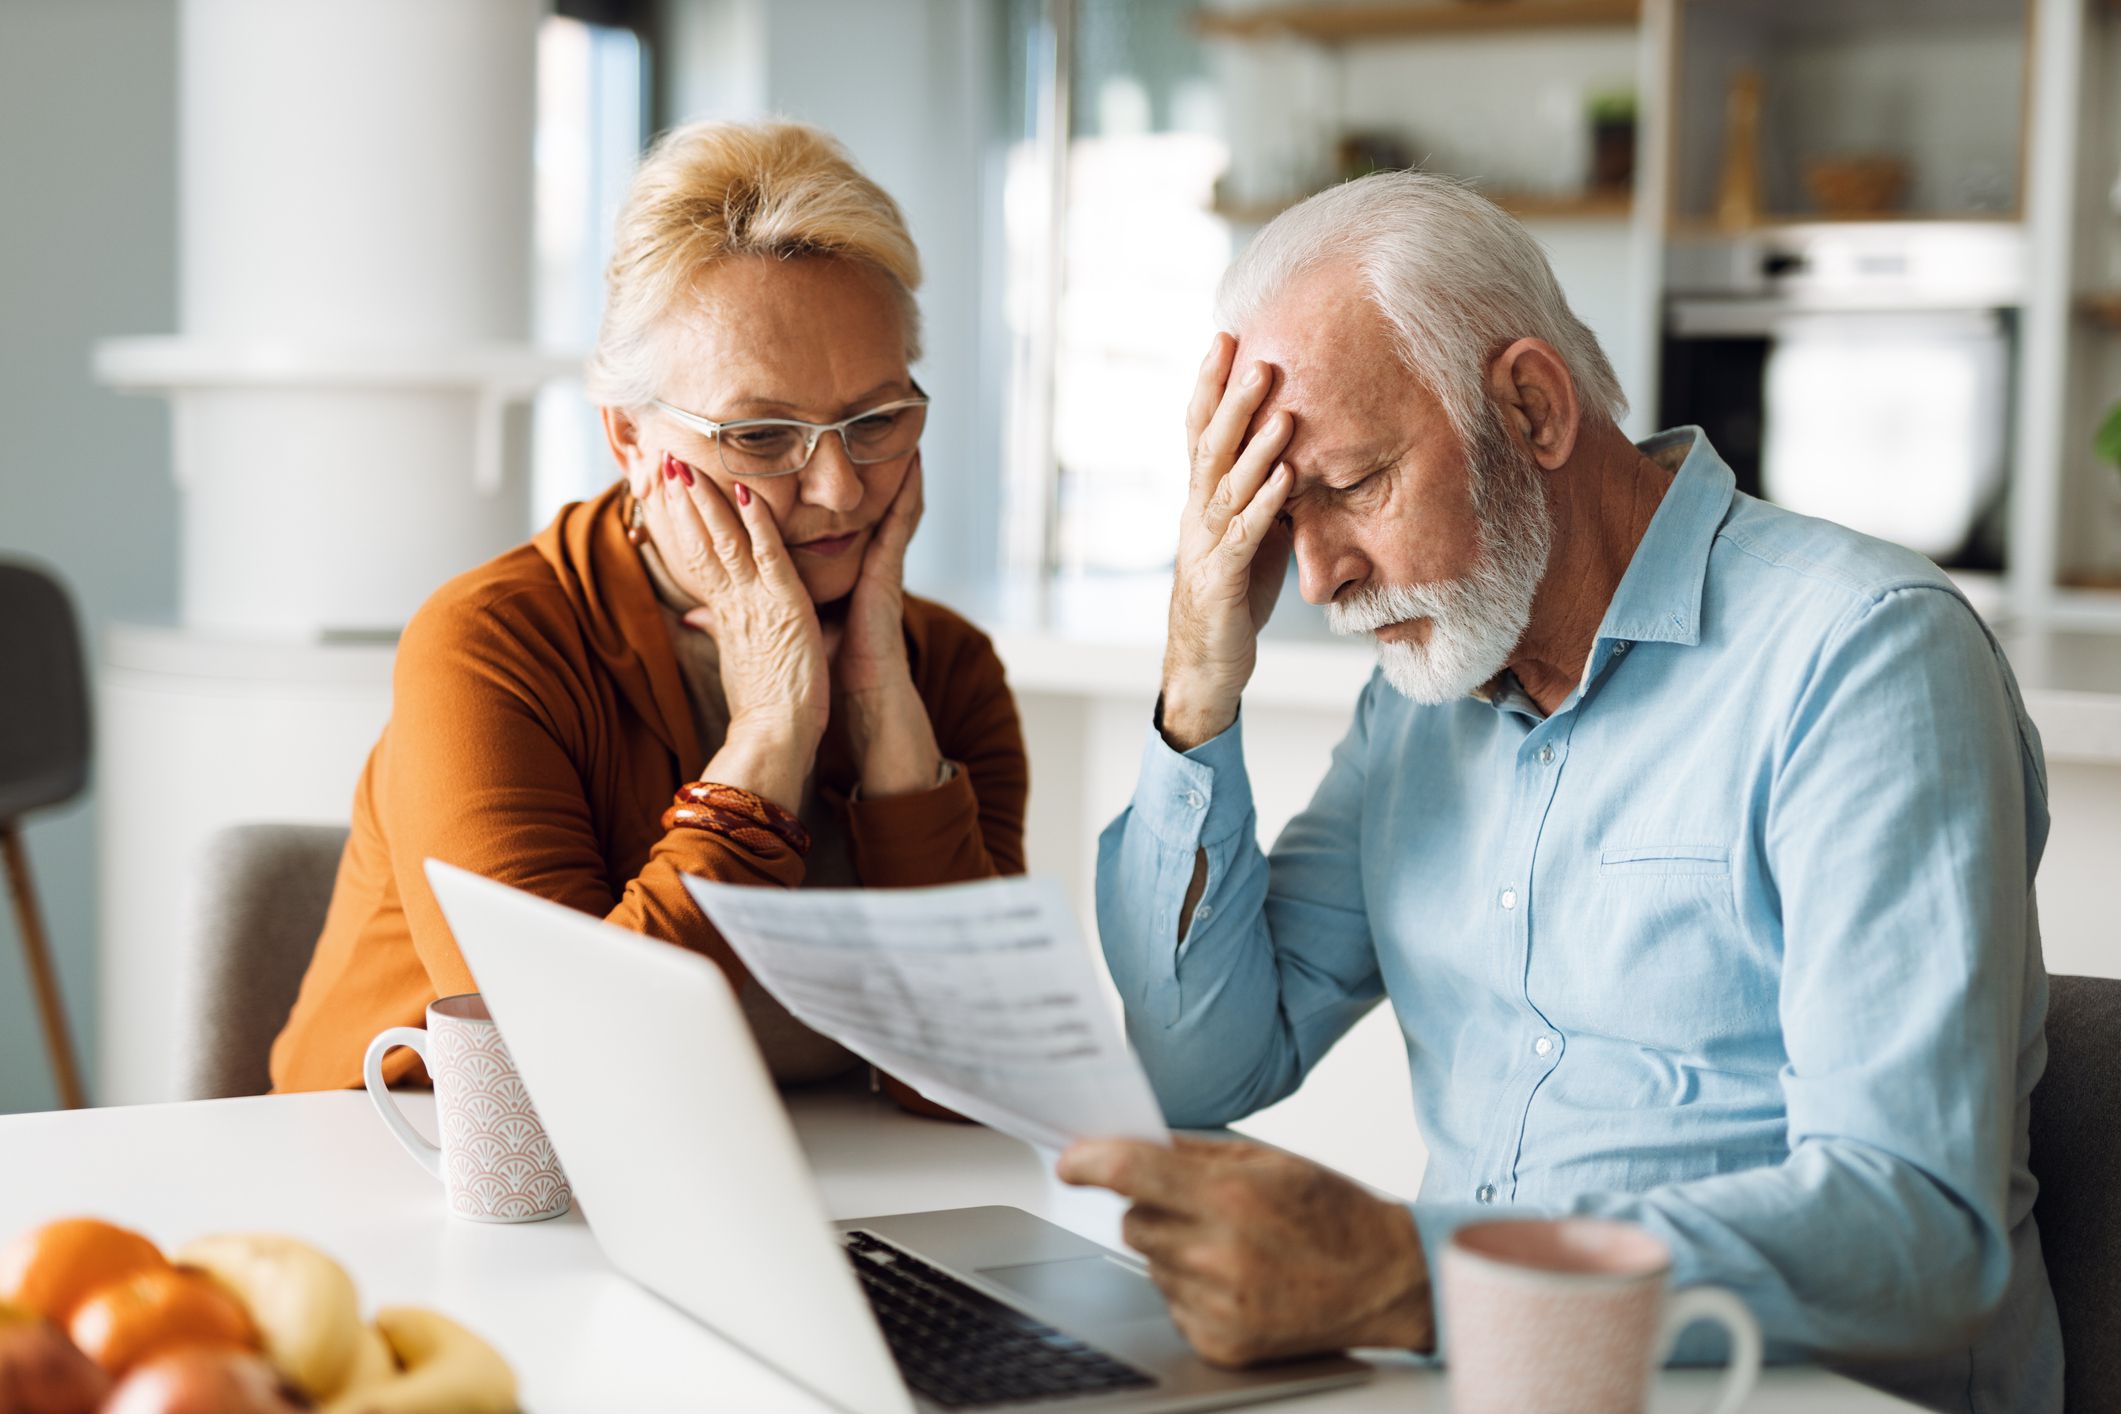 <h1><a href="https://www.msn.com/en-us/money/retirement/40-upsetting-facts-about-retirement-in-america/ss-AAUYvYm?li=BB16M4hs">40 upsetting facts about retirement in America</a></h1><ul><li><b><a href="https://www.msn.com/en-us/entertainment/news/rare-photos-of-bonnie-clyde-reveal-the-love-between-america-s-most-infamous-criminal-couple/ss-AA1gWlm7">Rare photos of Bonnie & Clyde reveal the love between America’s most notorious criminal couple</a></b></li> <li><b><a href="https://www.msn.com/en-us/news/other/10-of-the-wildest-ufo-stories-weve-ever-heard/ss-AA1fponA">10 of the wildest UFO stories we’ve ever heard</a></b></li>  </ul> <b>Like MediaFeed's content? <a href="https://www.msn.com/en-us/community/channel/vid-ckv6hf6hjif65e0cjnm83s7yb2y0w5xmun0j4refire0ev6727is">Be sure to follow us.</a></b>